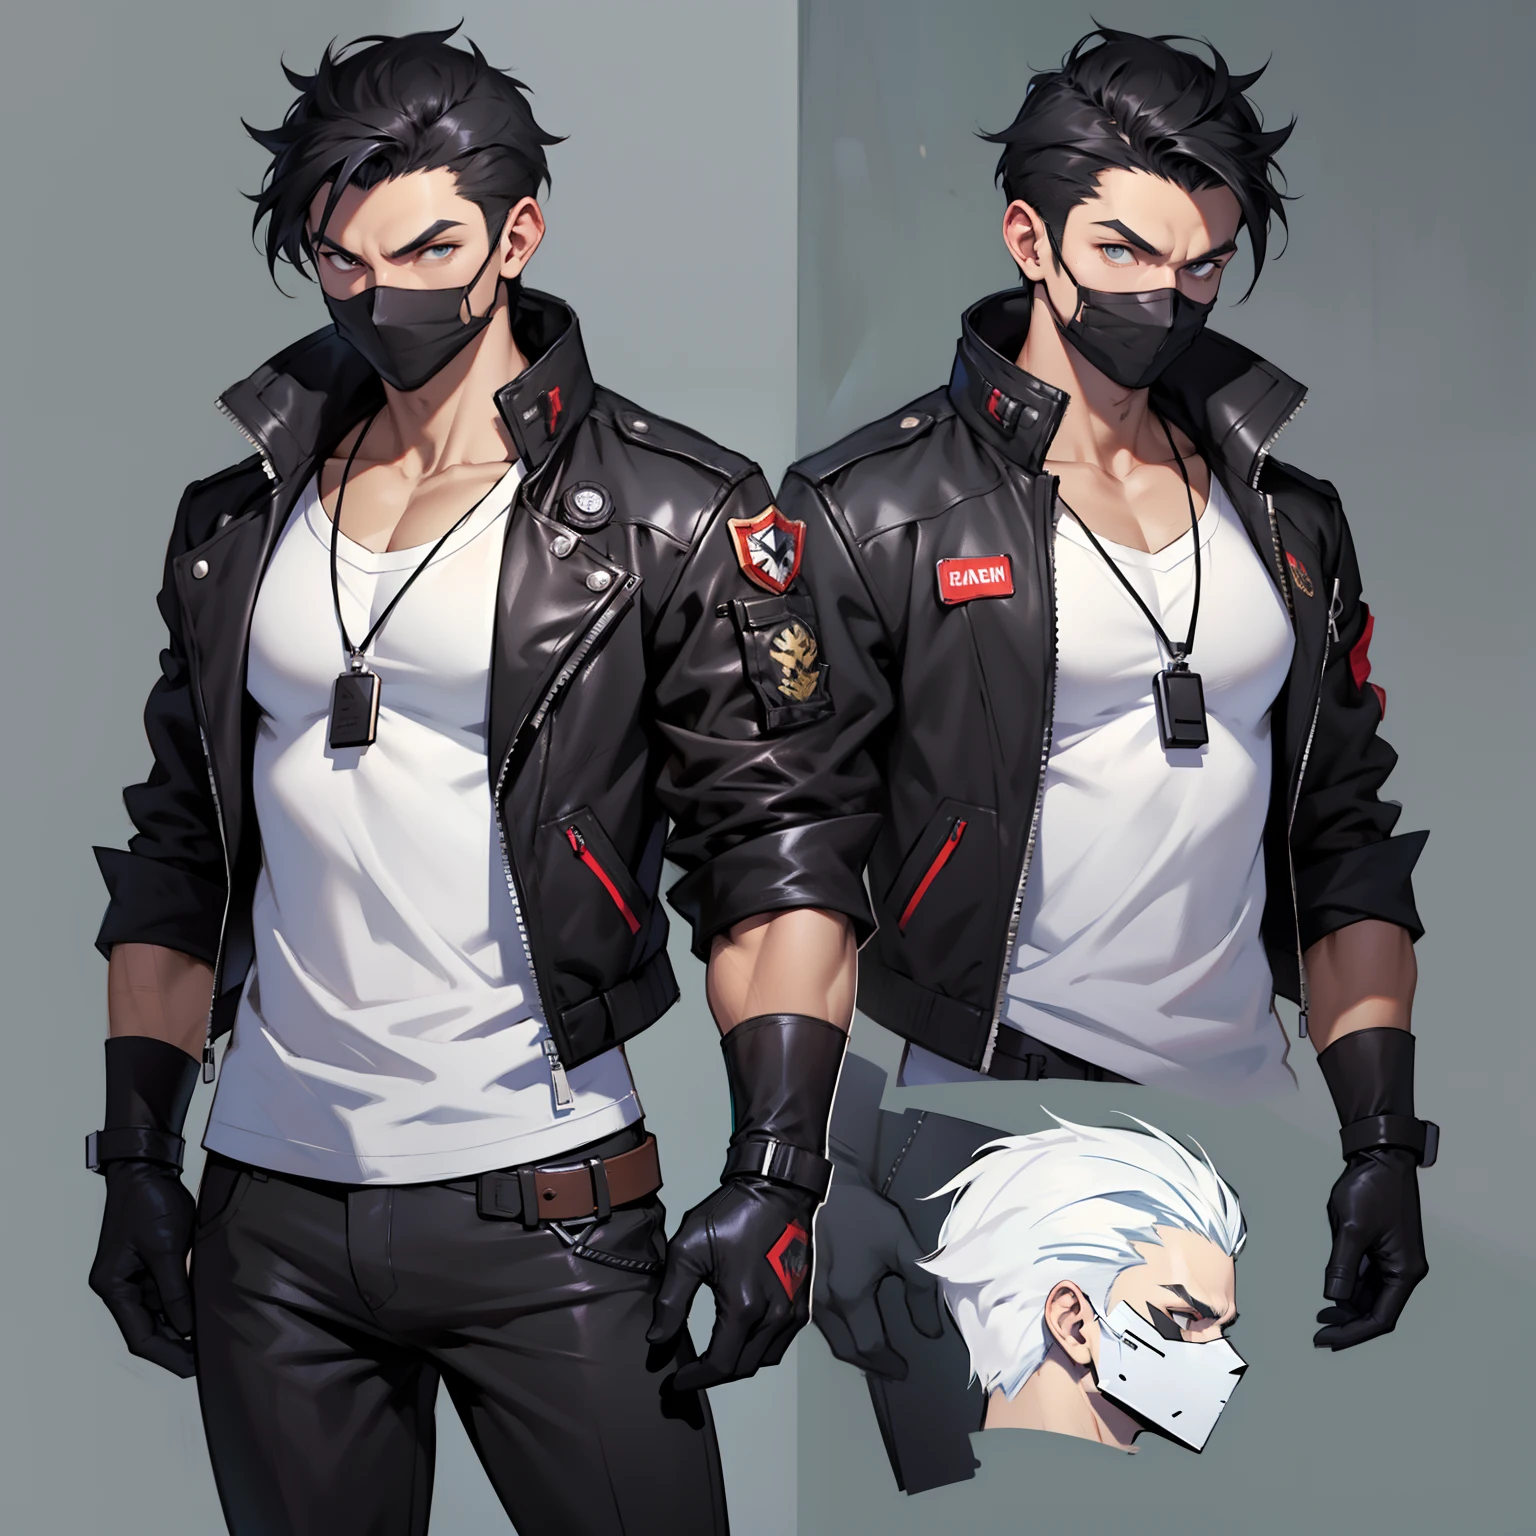 A man with a black jacket over a white shirt, black ClothMask , pushed back black hair , ((character concept art)), ((character design sheet, same character, front, side, back)) maple story character art, video game character design, video game character design, expert high detail concept art, metal bullet concept art, funny character design, Black pants ,BLACK MASK IN HIS MOUTH , BLACK JACKET OVER A WHITE SHIRT , PUSHED BACK HAIRCUT , black gloves